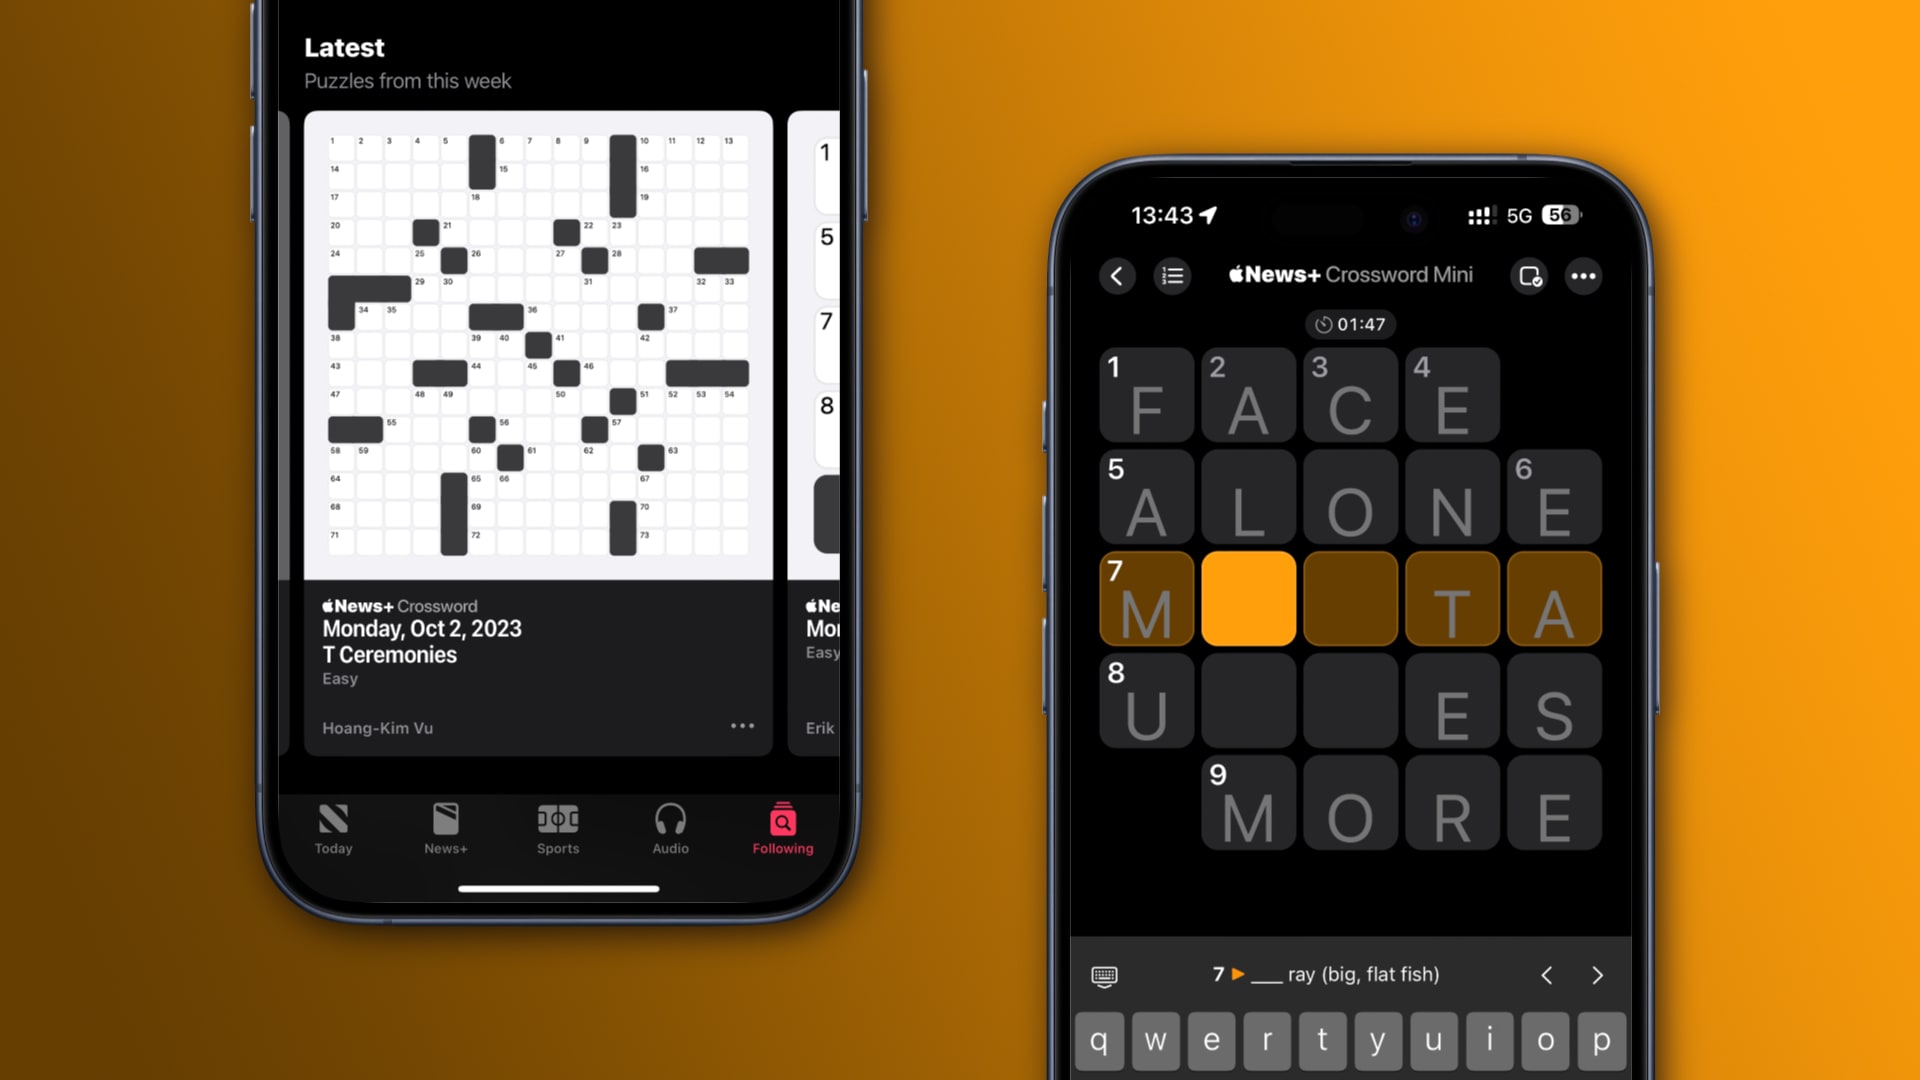 How to play NYT-style daily crossword puzzles on Apple News+